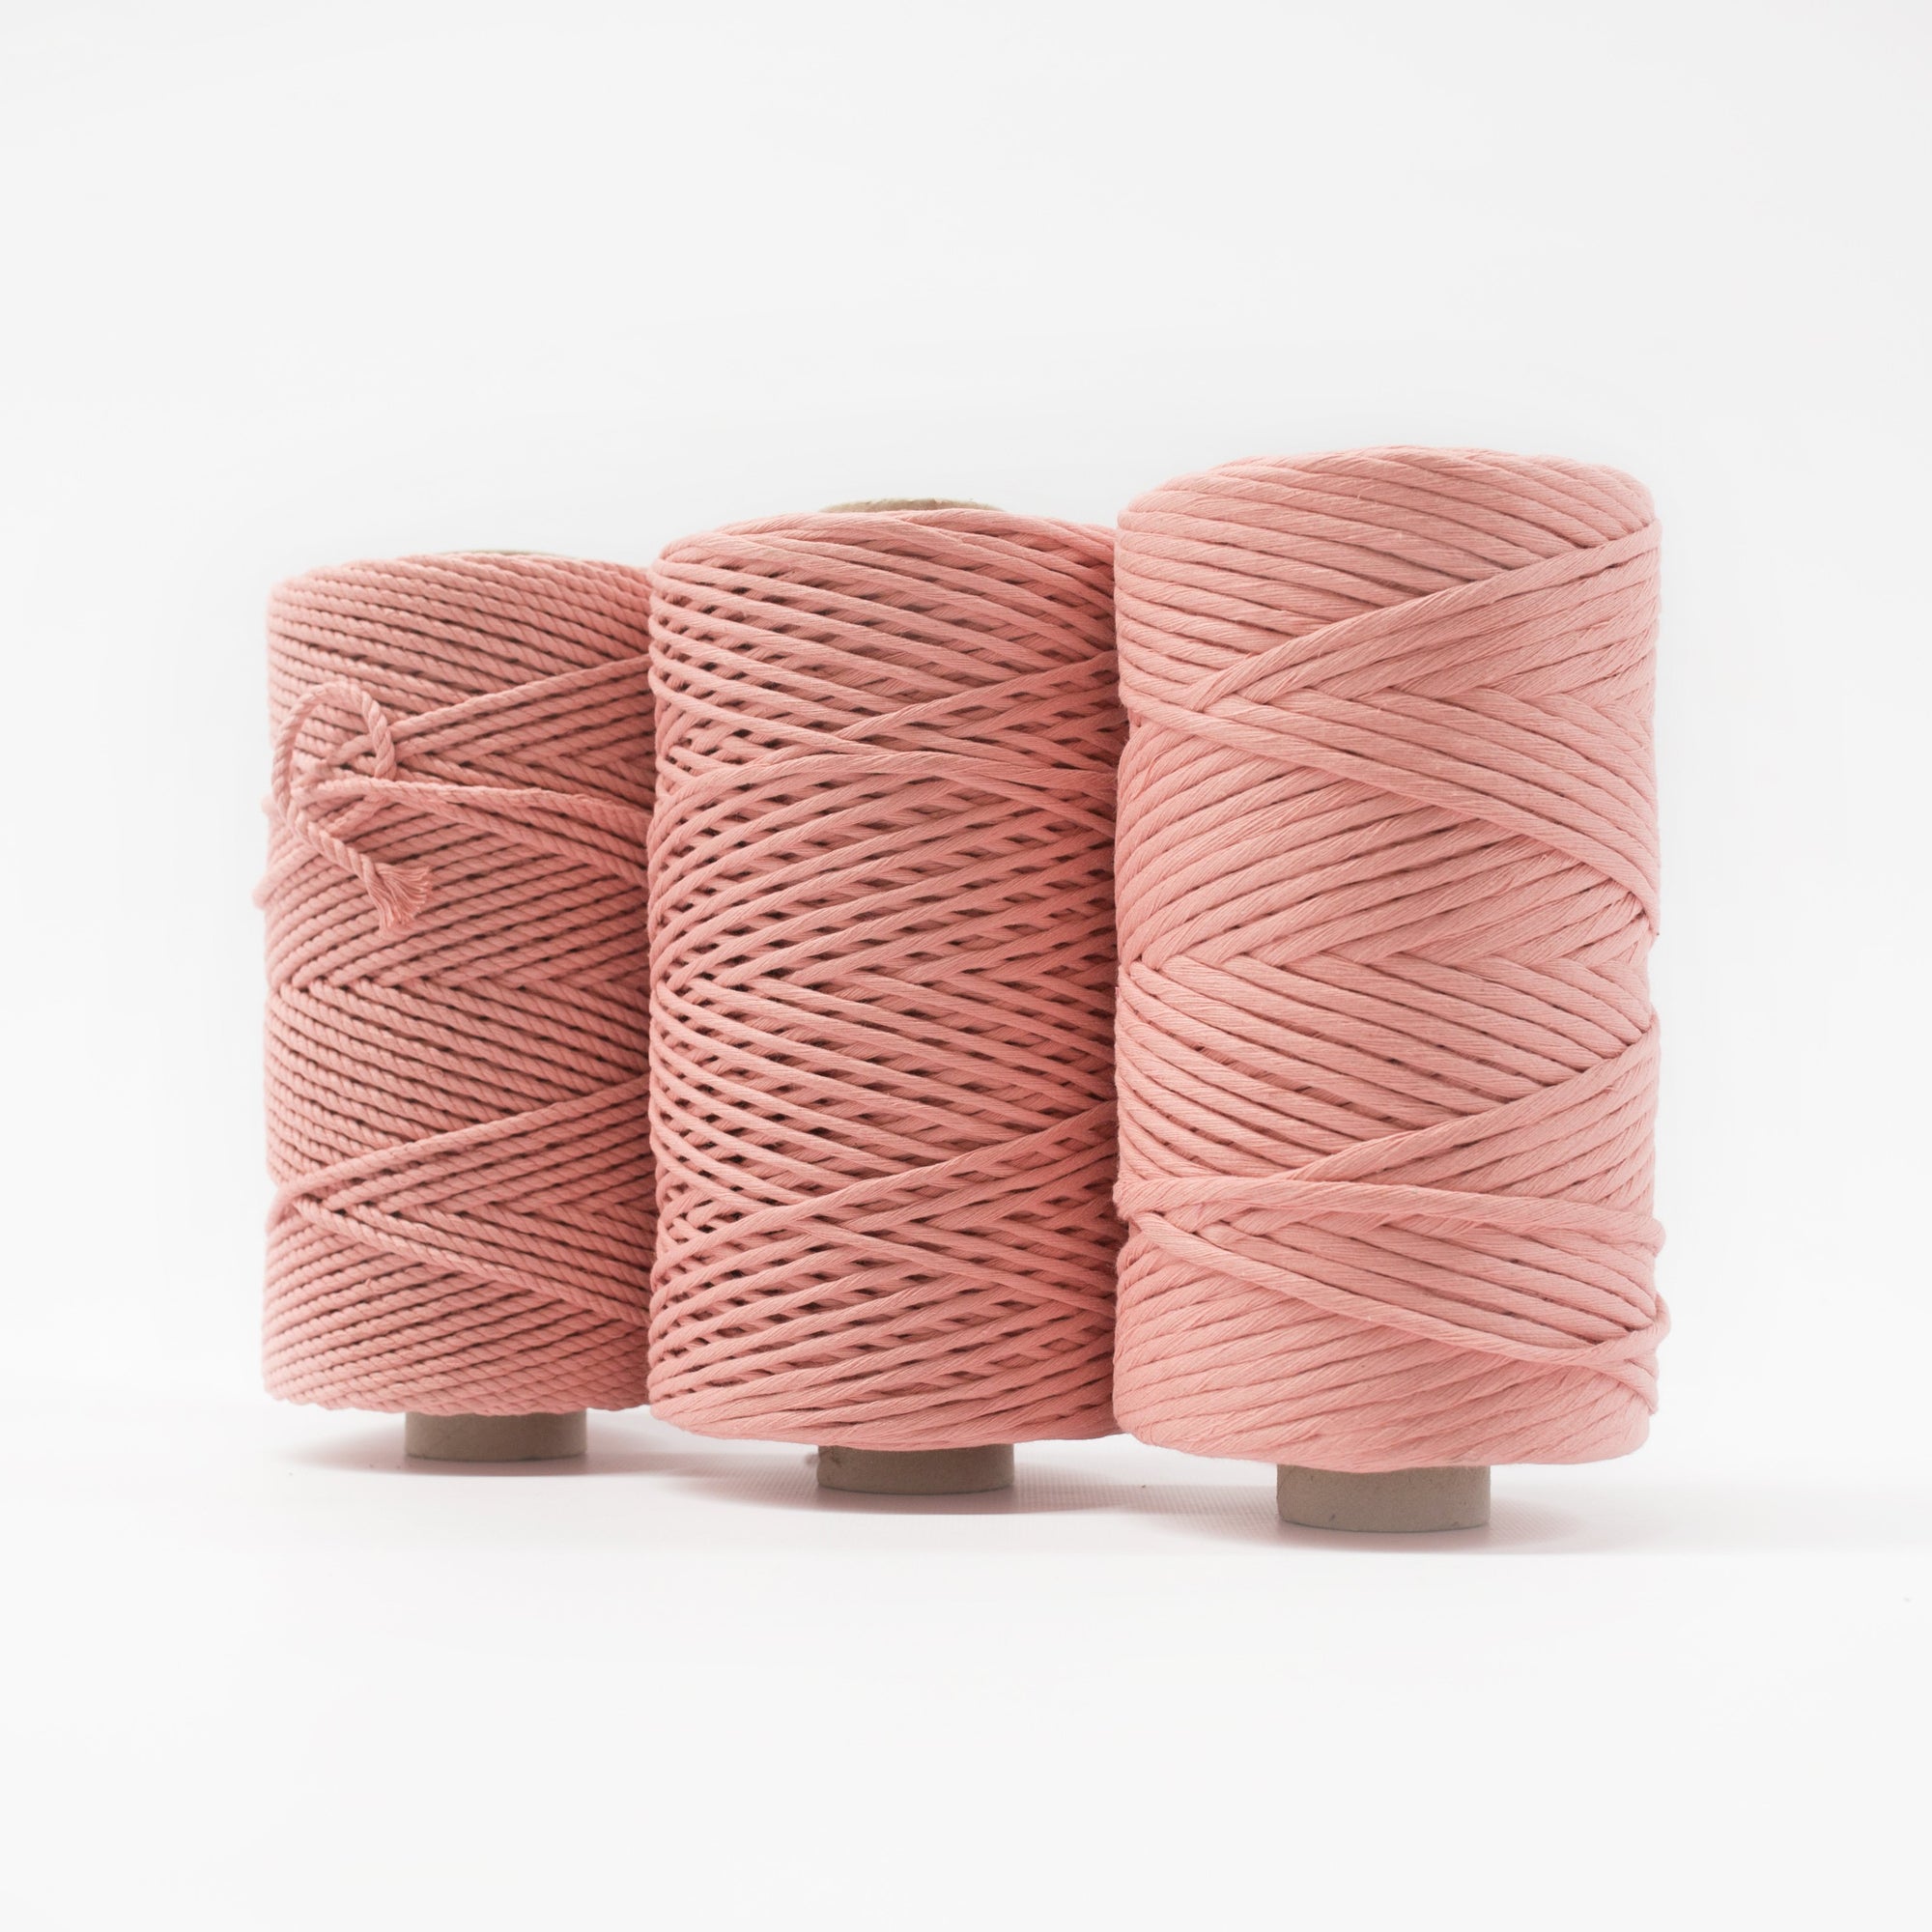 Mary Maker Studio Luxe Colour Cotton 4mm 1KG Recycled Luxe Macrame Rope // Coral macrame cotton macrame rope macrame workshop macrame patterns macrame